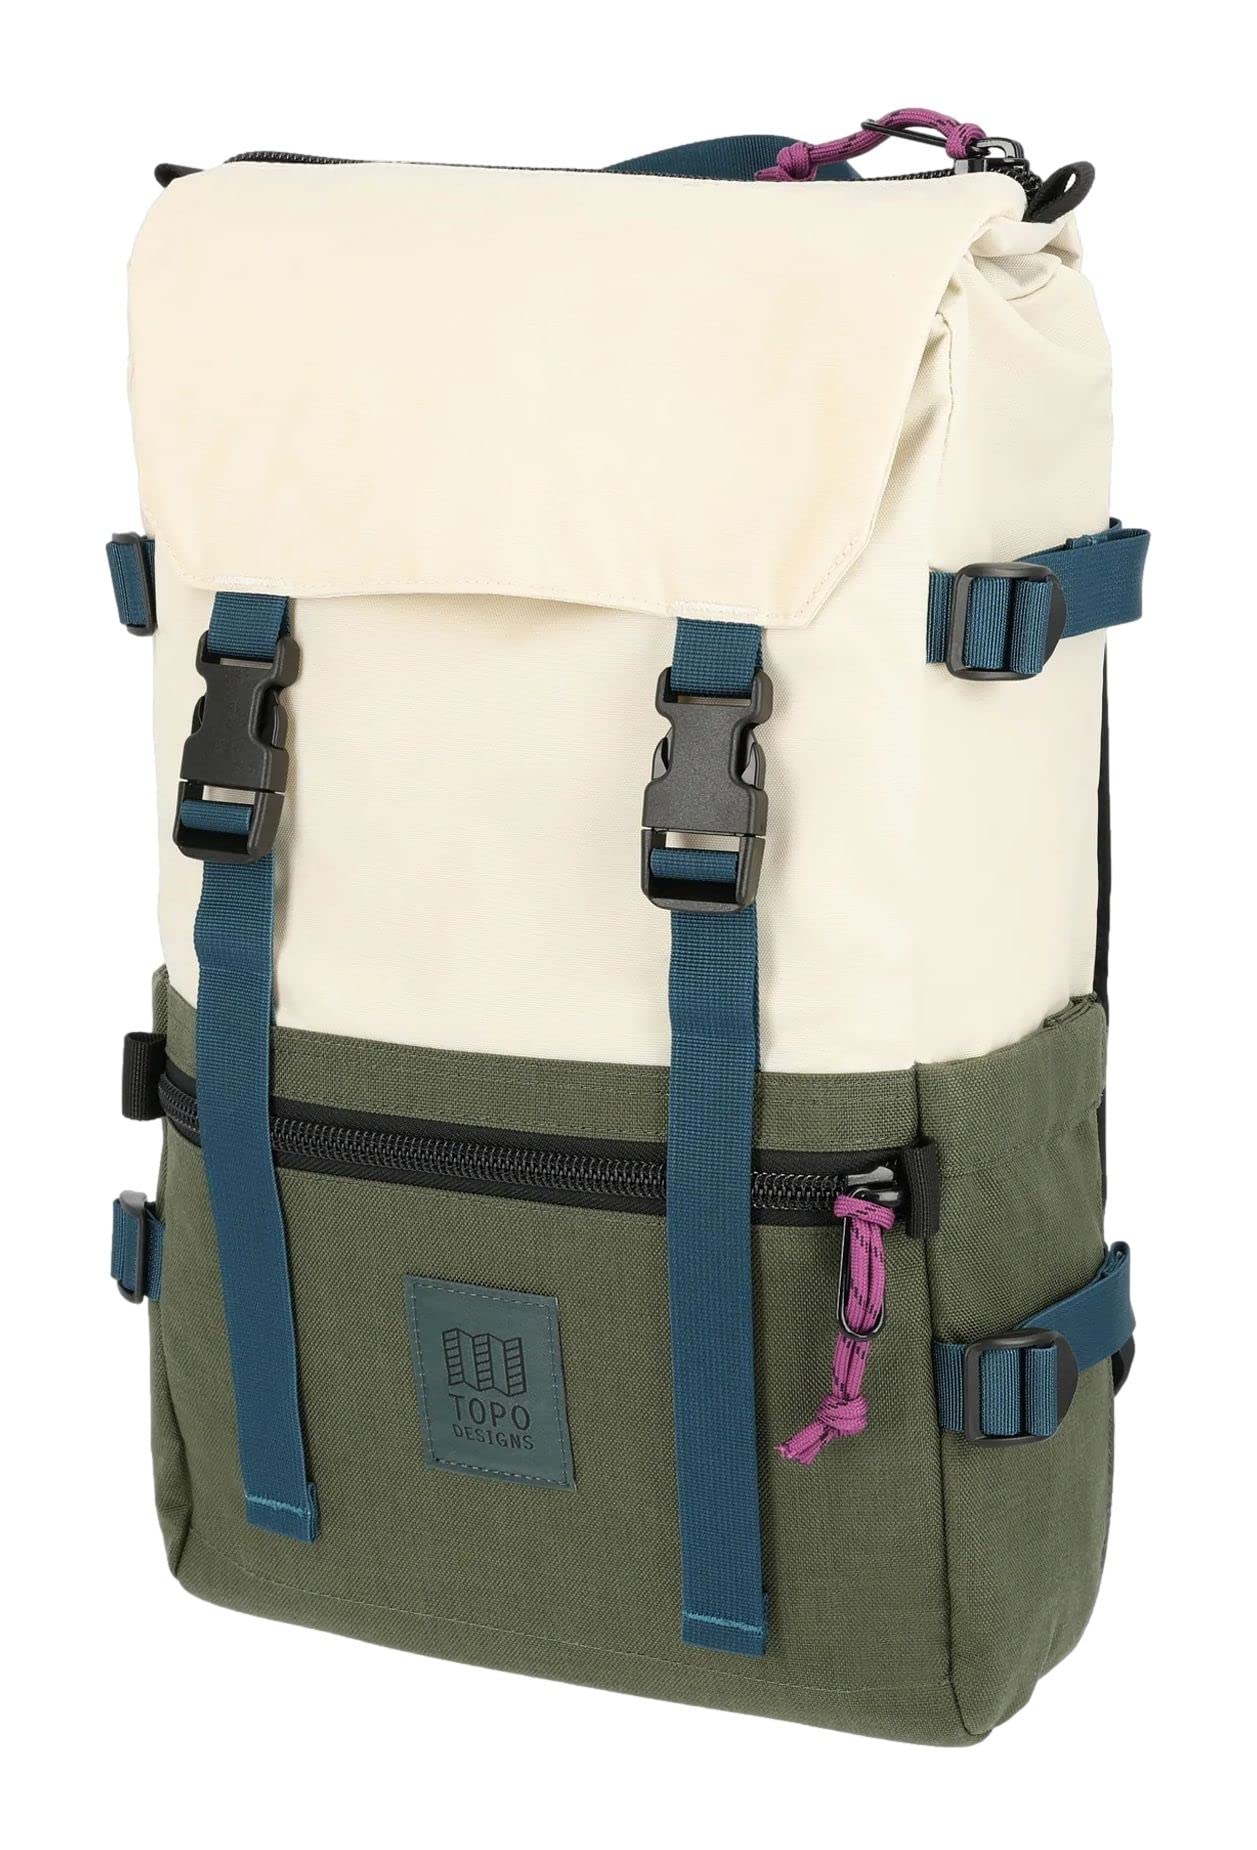 Topo Designs Rover Pack Classic - Bone WhiteOlive One Size並行輸入品